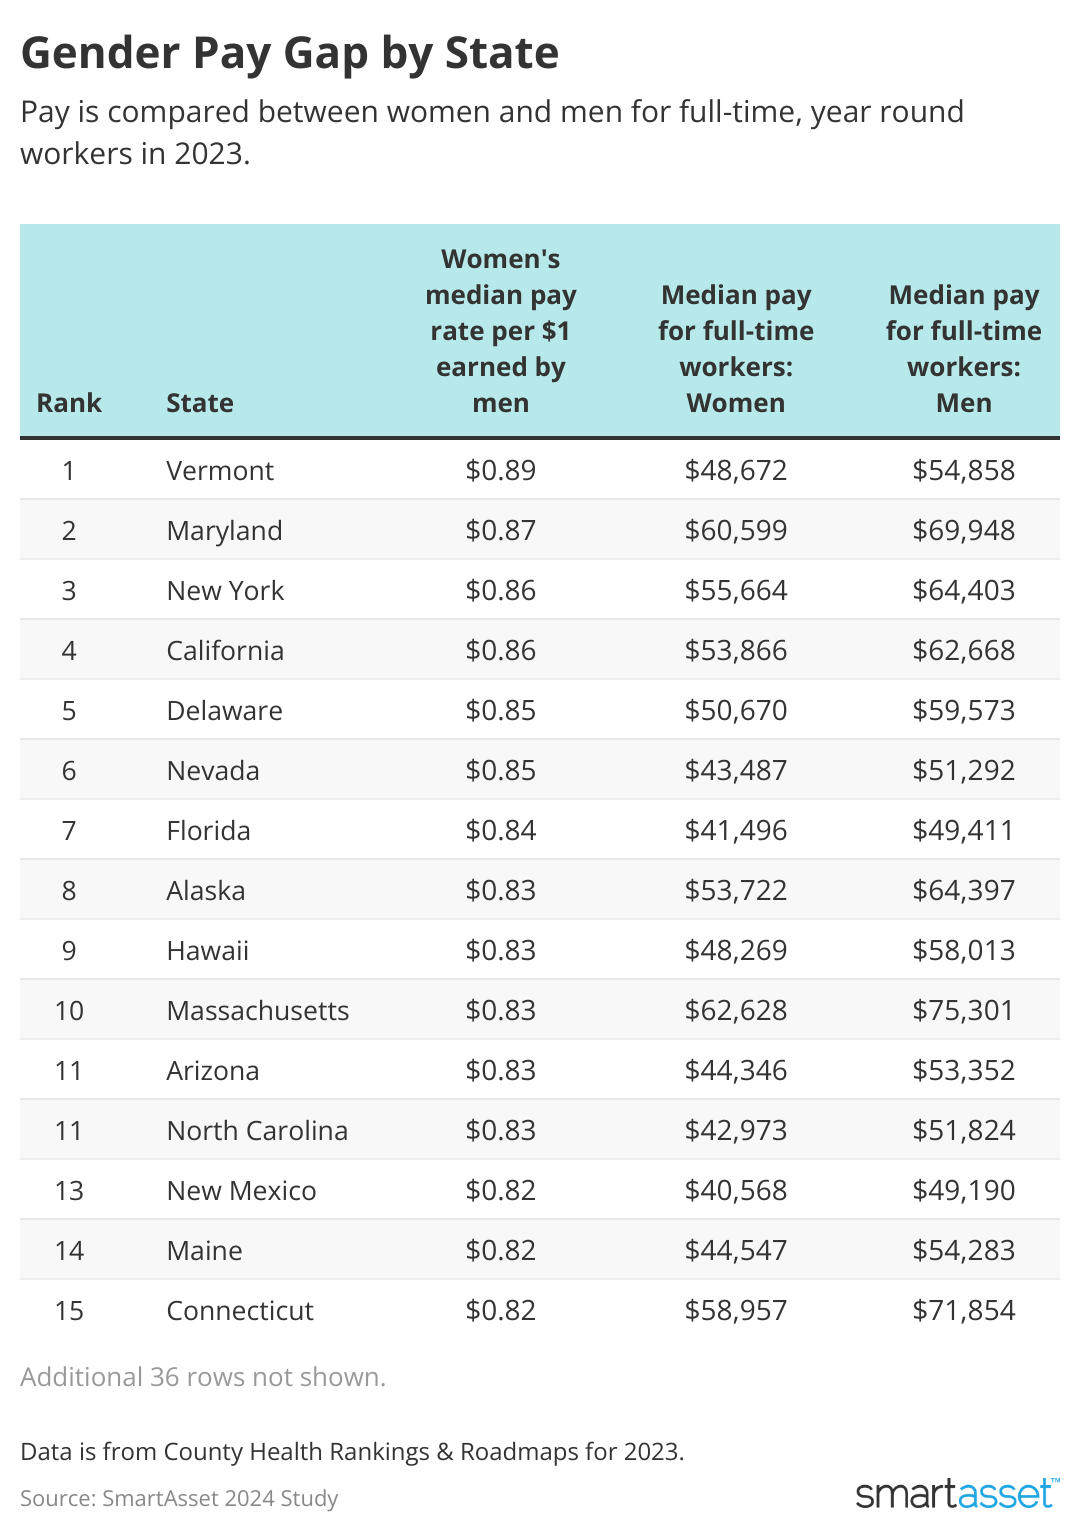 Table showing gender pay gap by state.